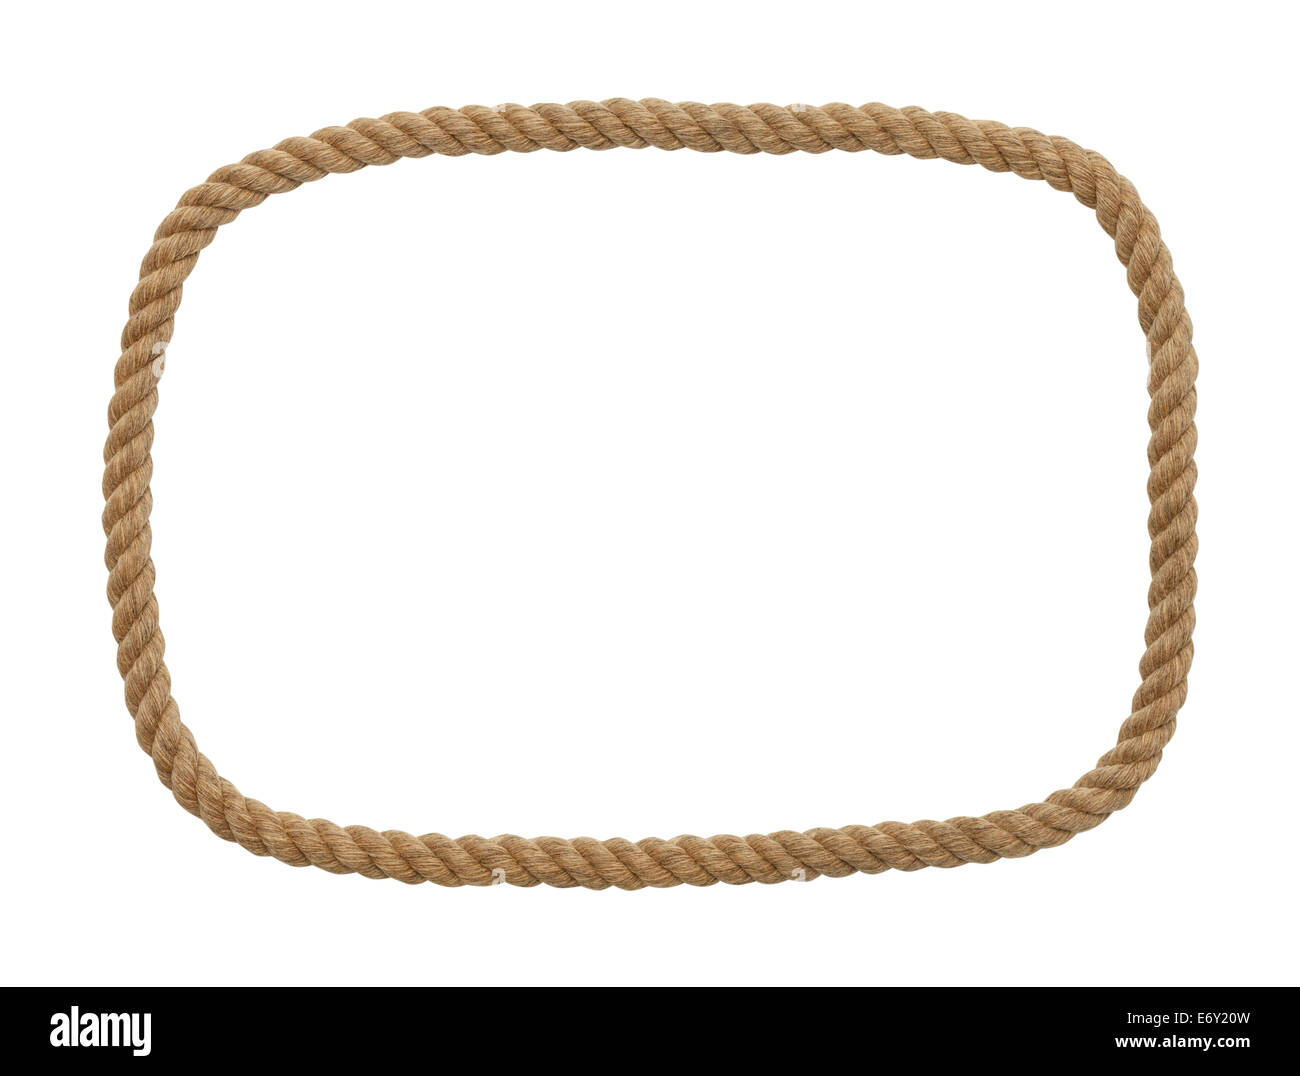 Brown Western Rope in a Rectangle Frame Shape Isolated on White Background. Stock Photo